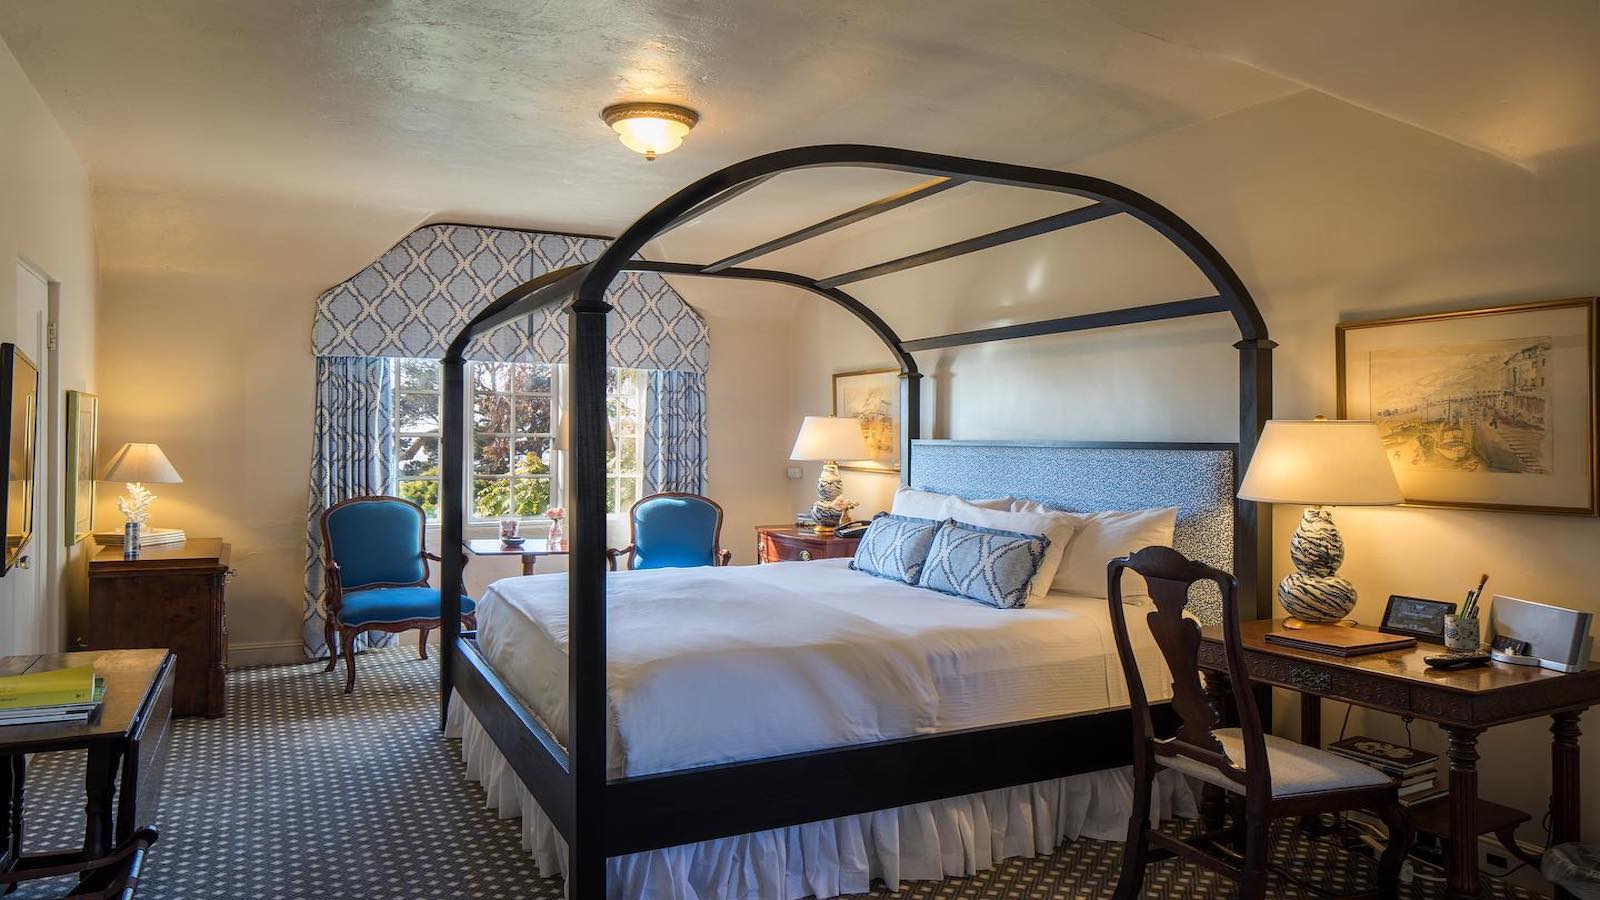 Four poster bed in the L'Auberge hotel in Carmel, California.